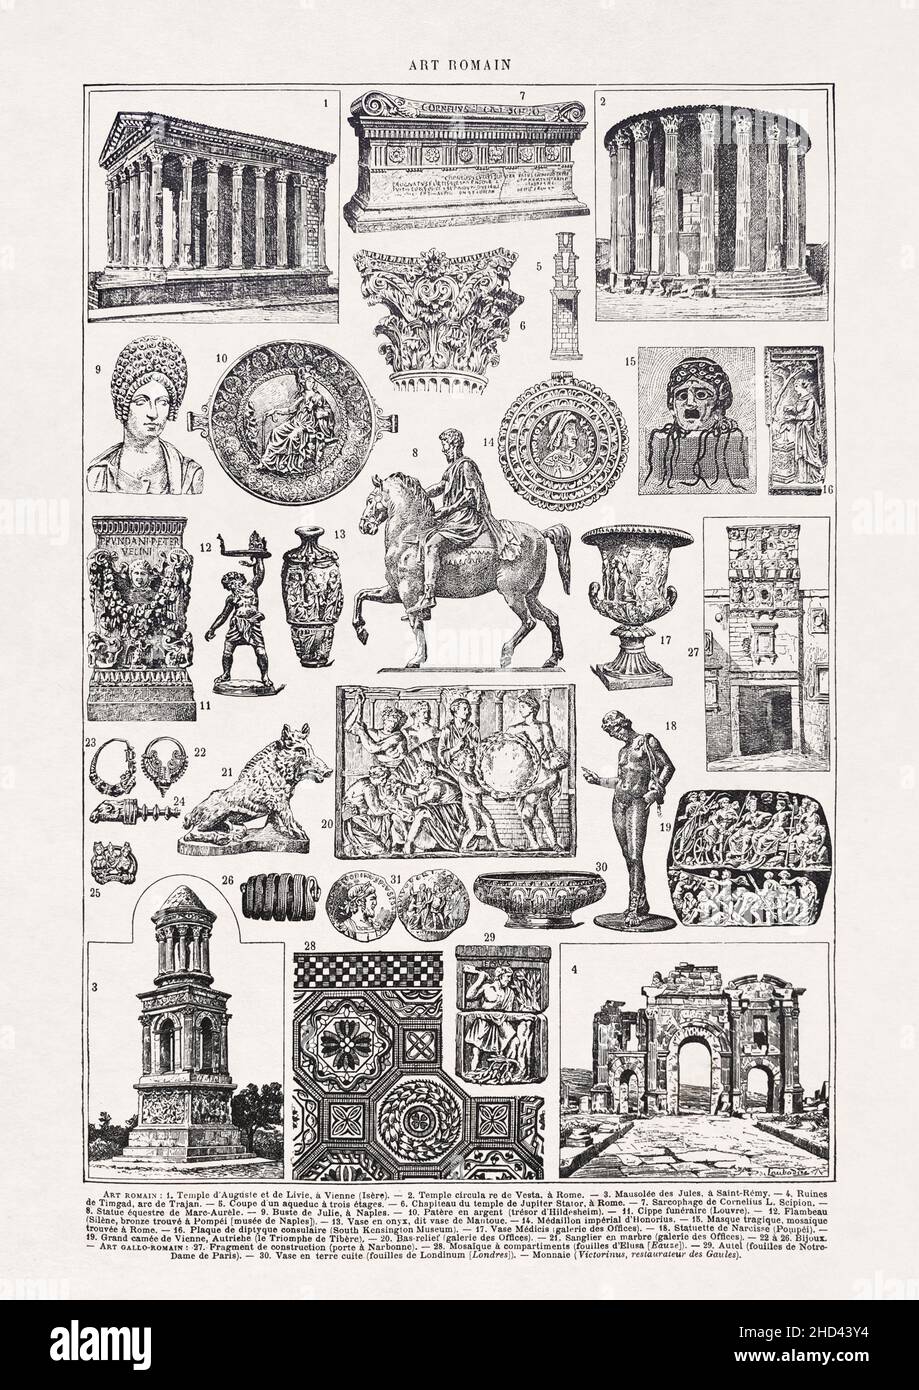 Old illustration about the Roman art by D. de Laubadère published in the late 19th century. Stock Photo